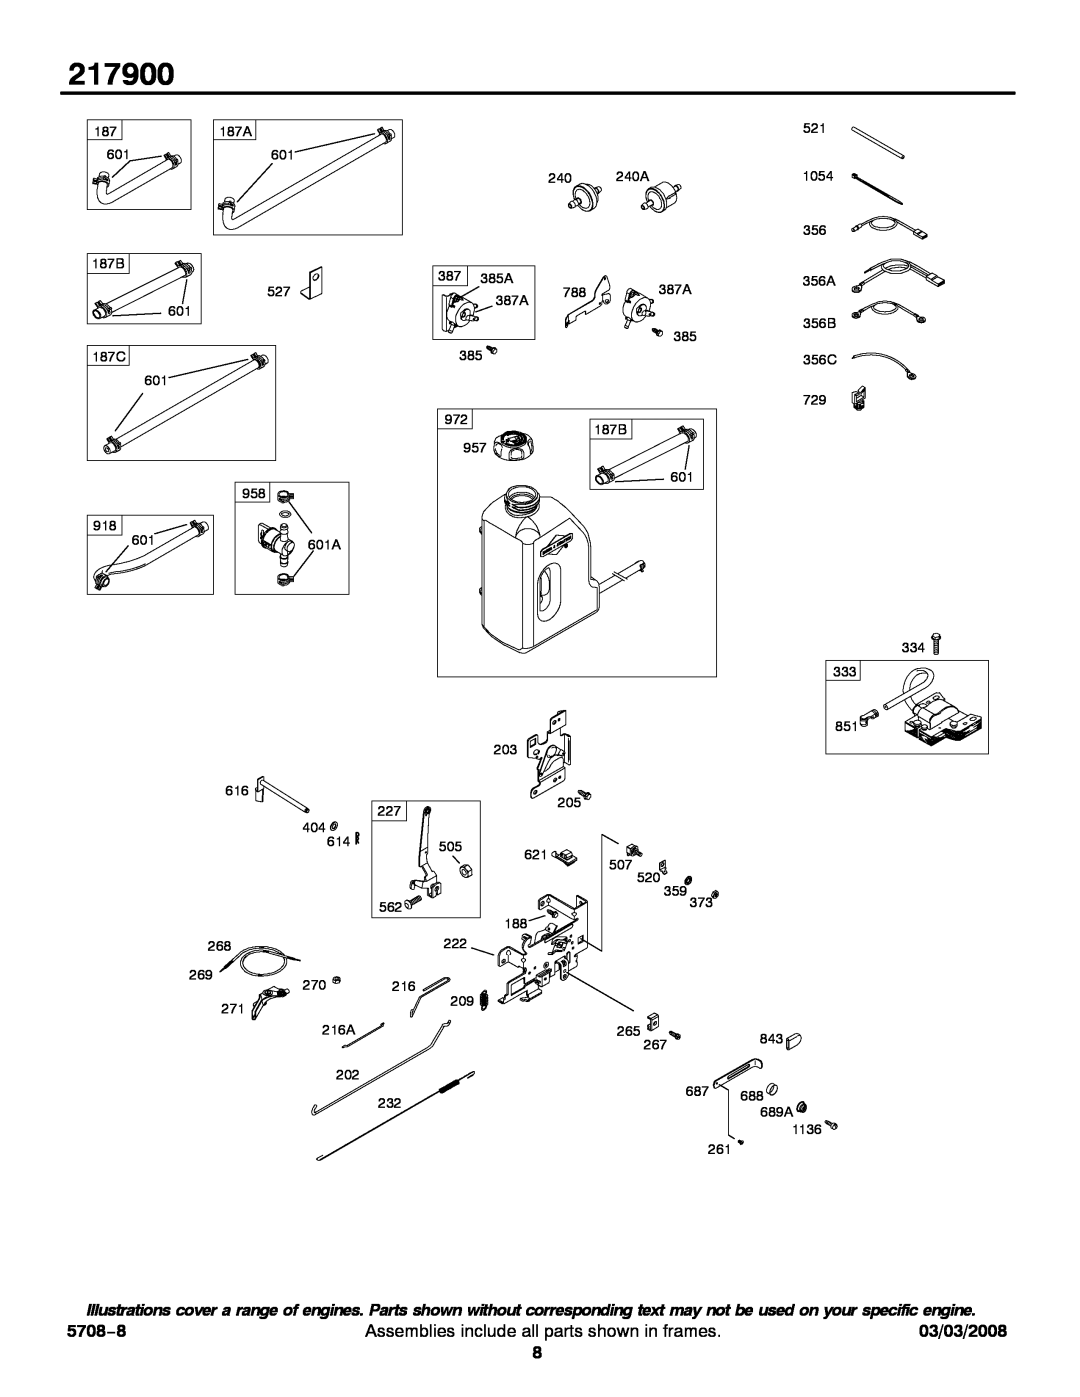 Briggs & Stratton 217900 service manual 5708−8, Assemblies include all parts shown in frames, 03/03/2008 